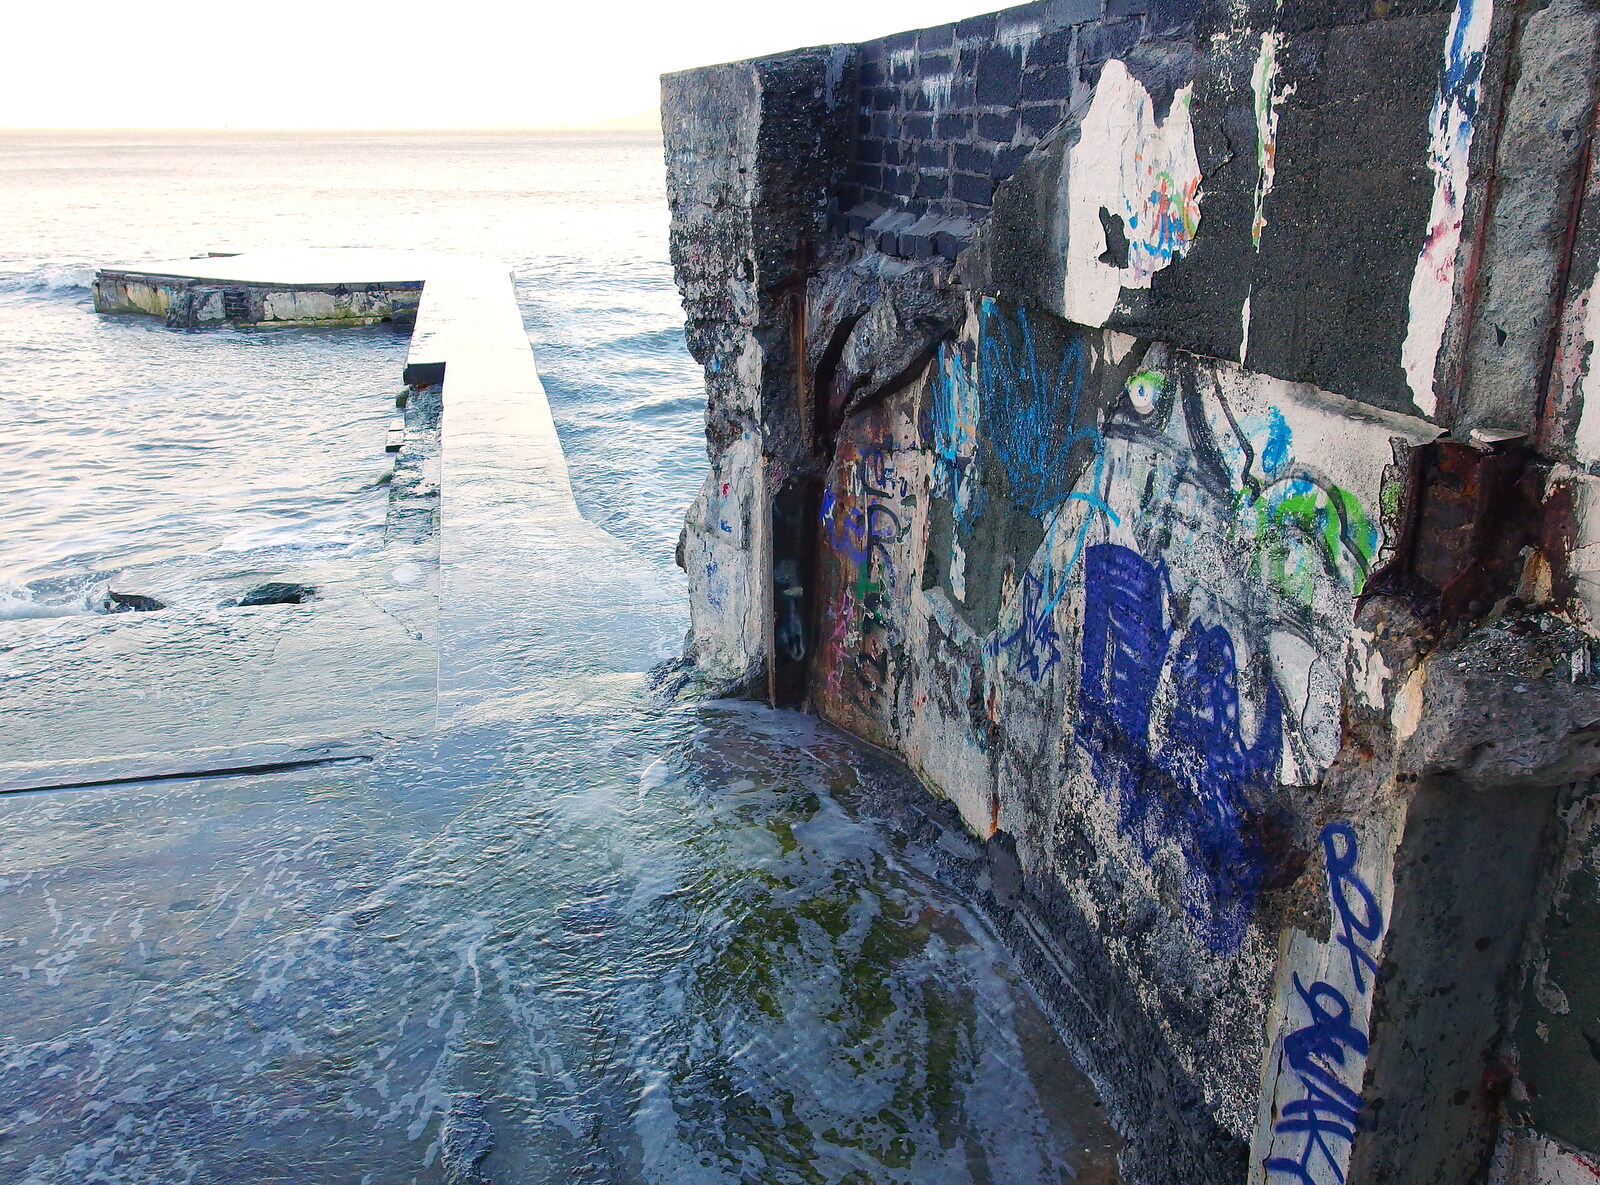 More remains of the lido from A Trip to Monkstown Farm and Blackrock, County Dublin, Ireland - 2nd January 2014